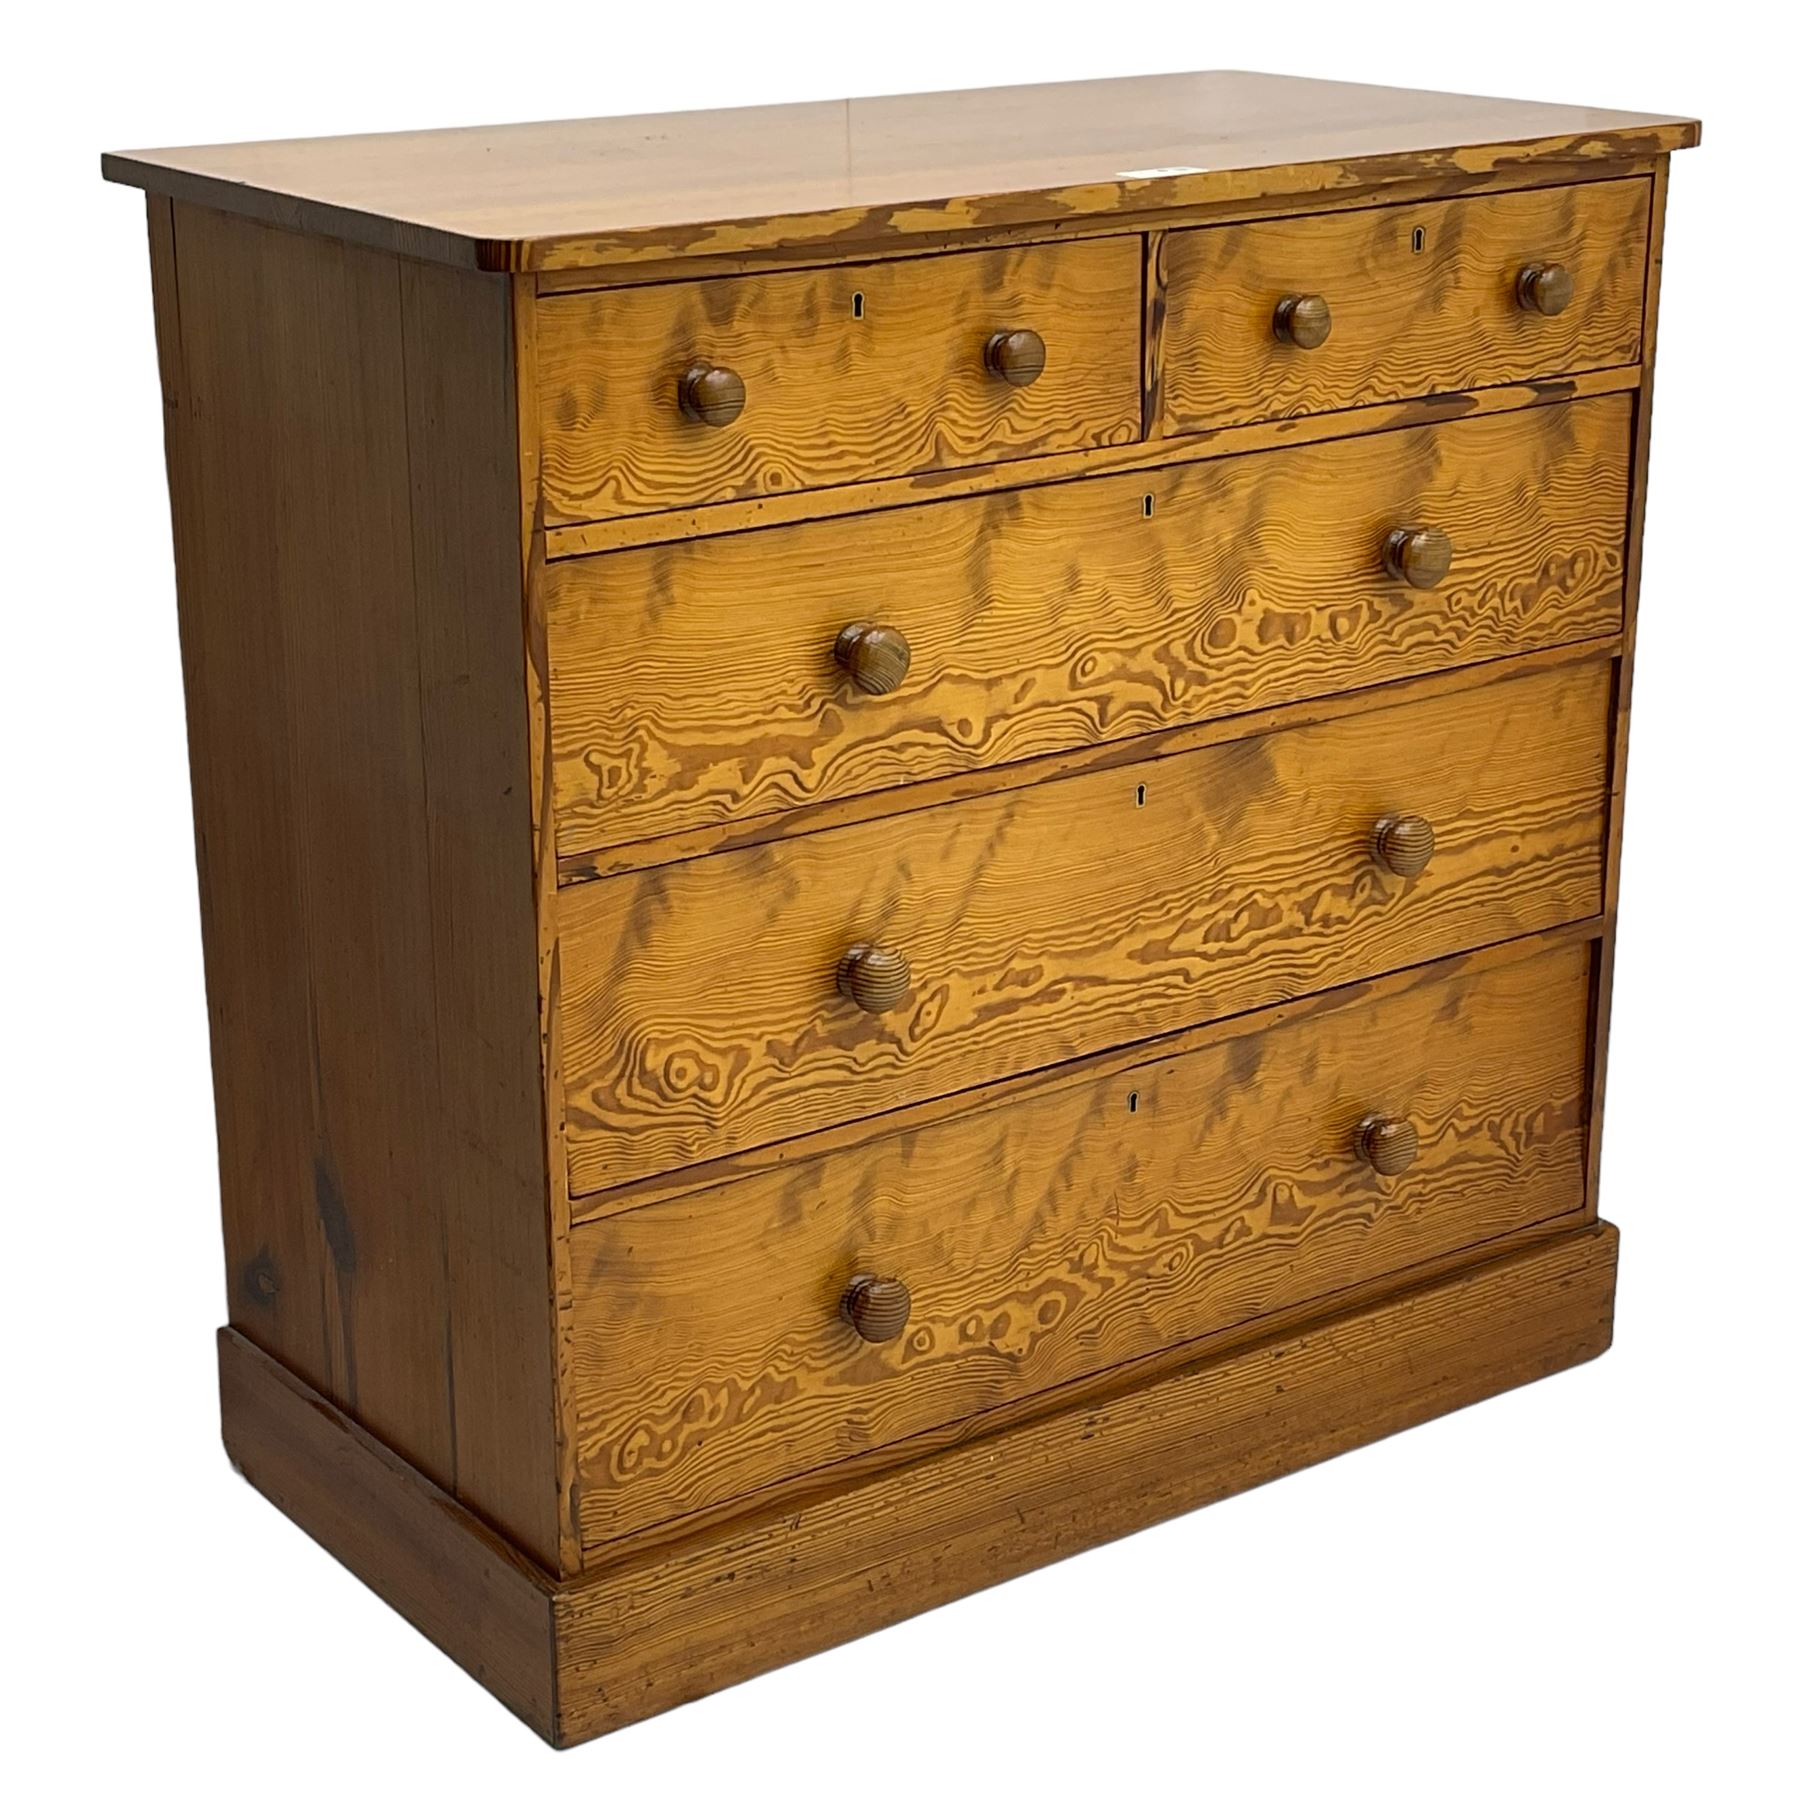 Victorian pitch pine chest - Image 4 of 8